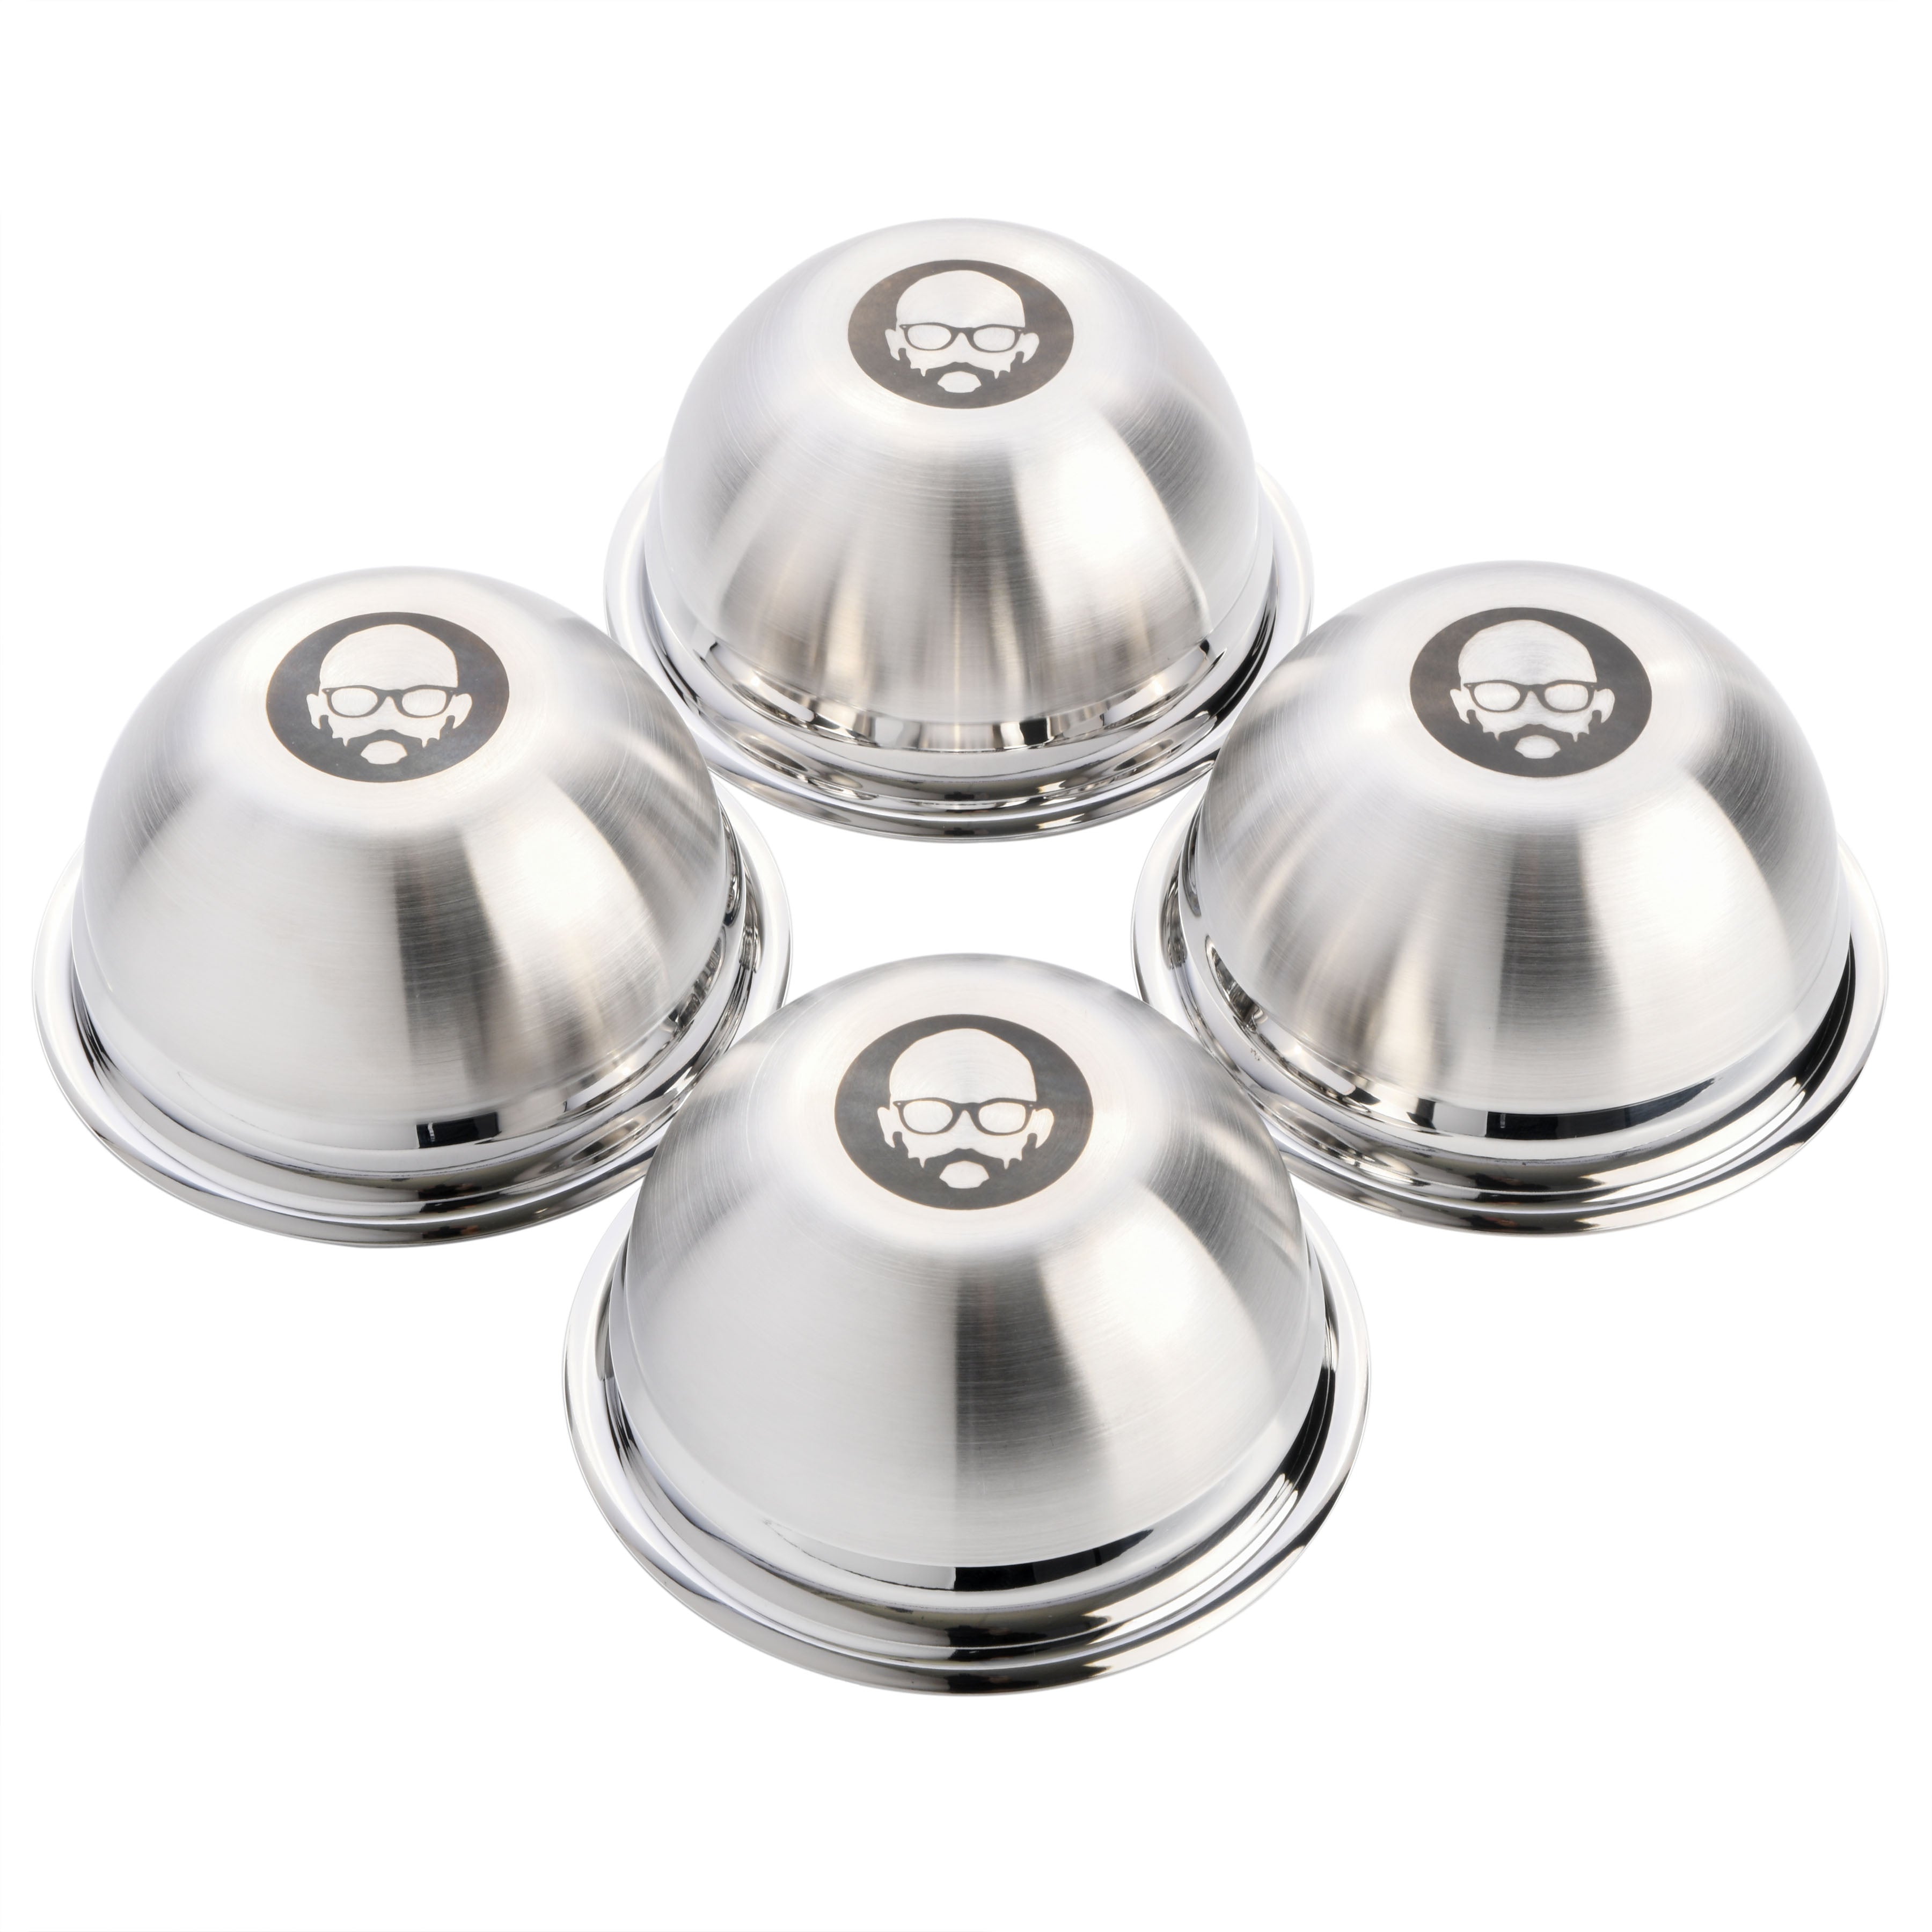 Bombay Stainless Steel Prep Bowls with Lids - Set of 4